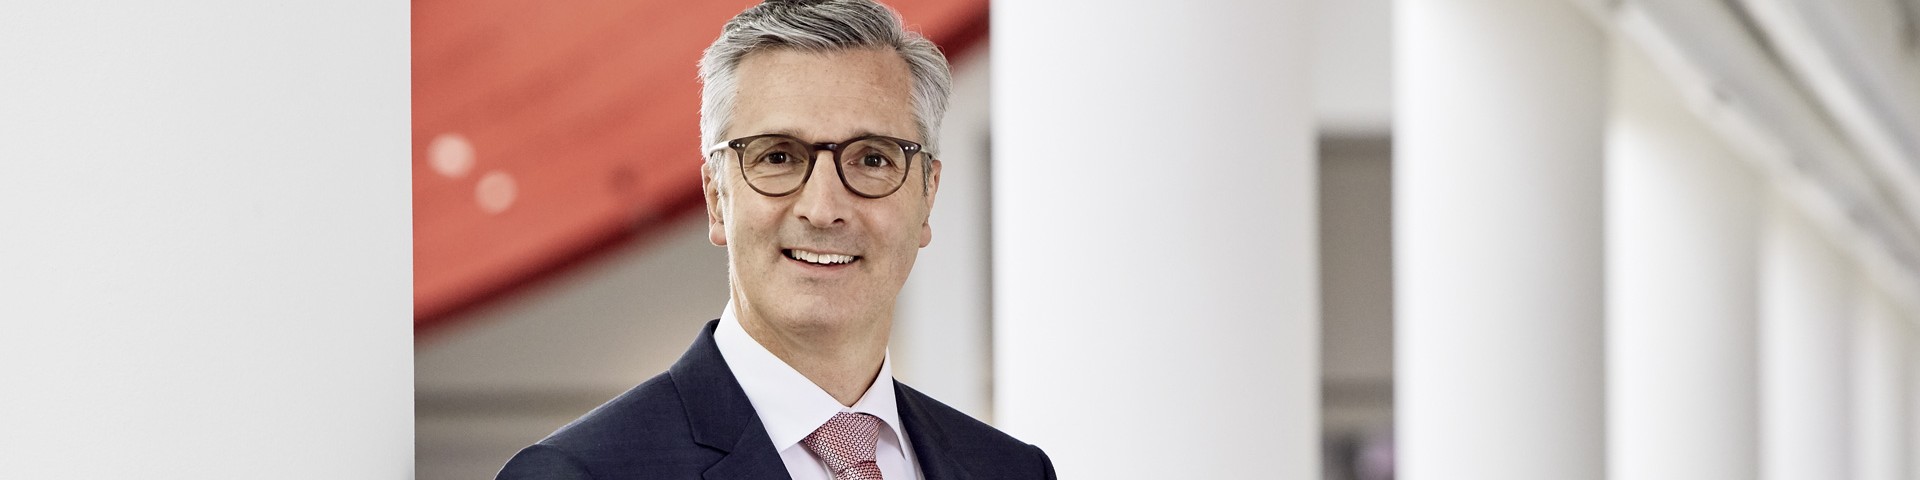 Report of the Central Managing Board of the Würth Group